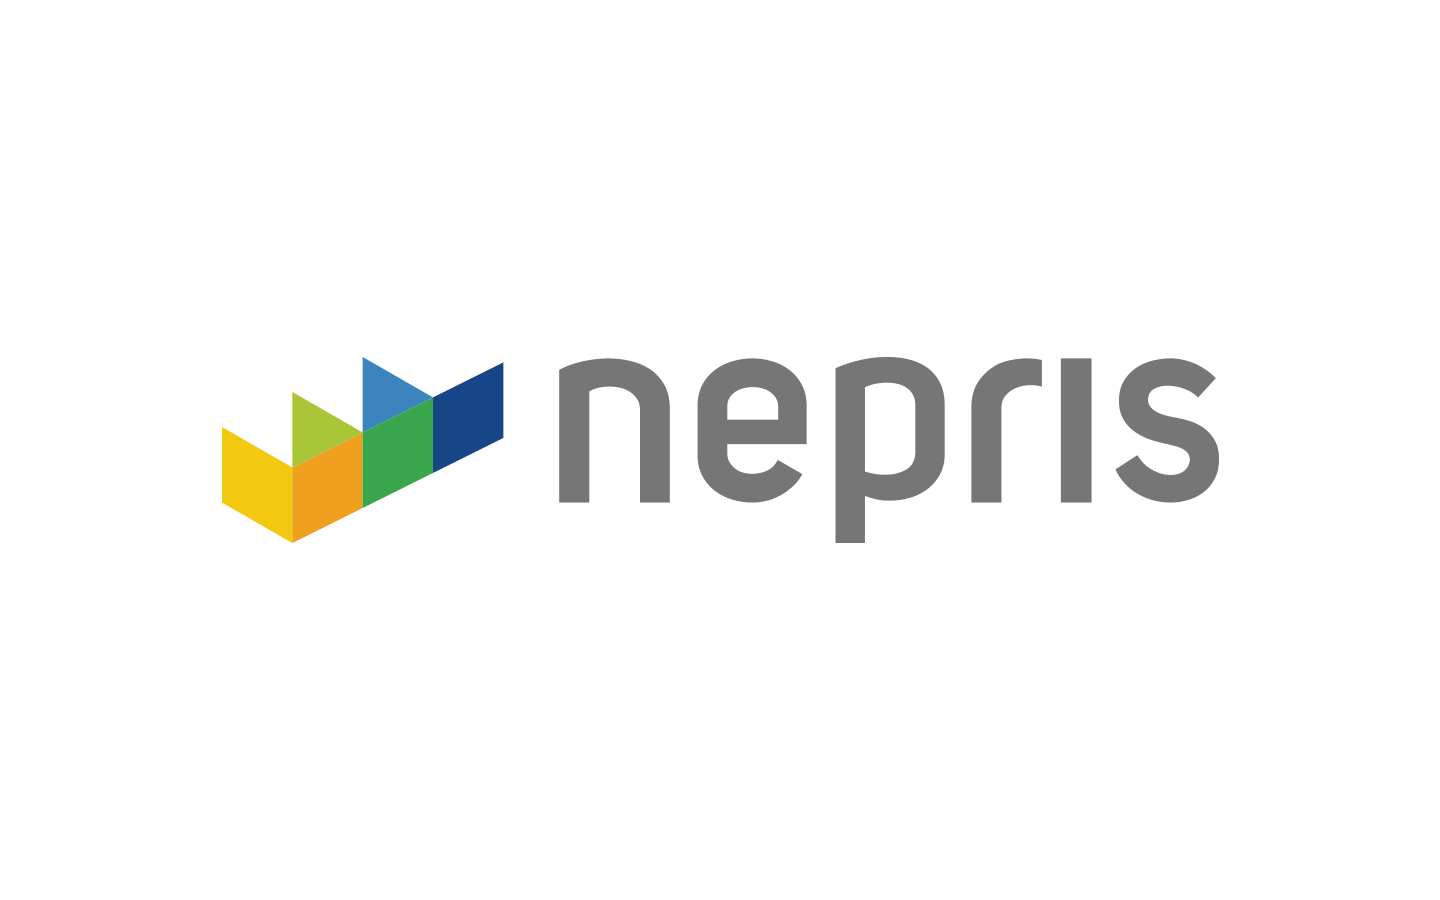 Nepris' cloud-based platform connects educators and industry experts to help bring relevance to the classroom and inspire students towards real-world careers.